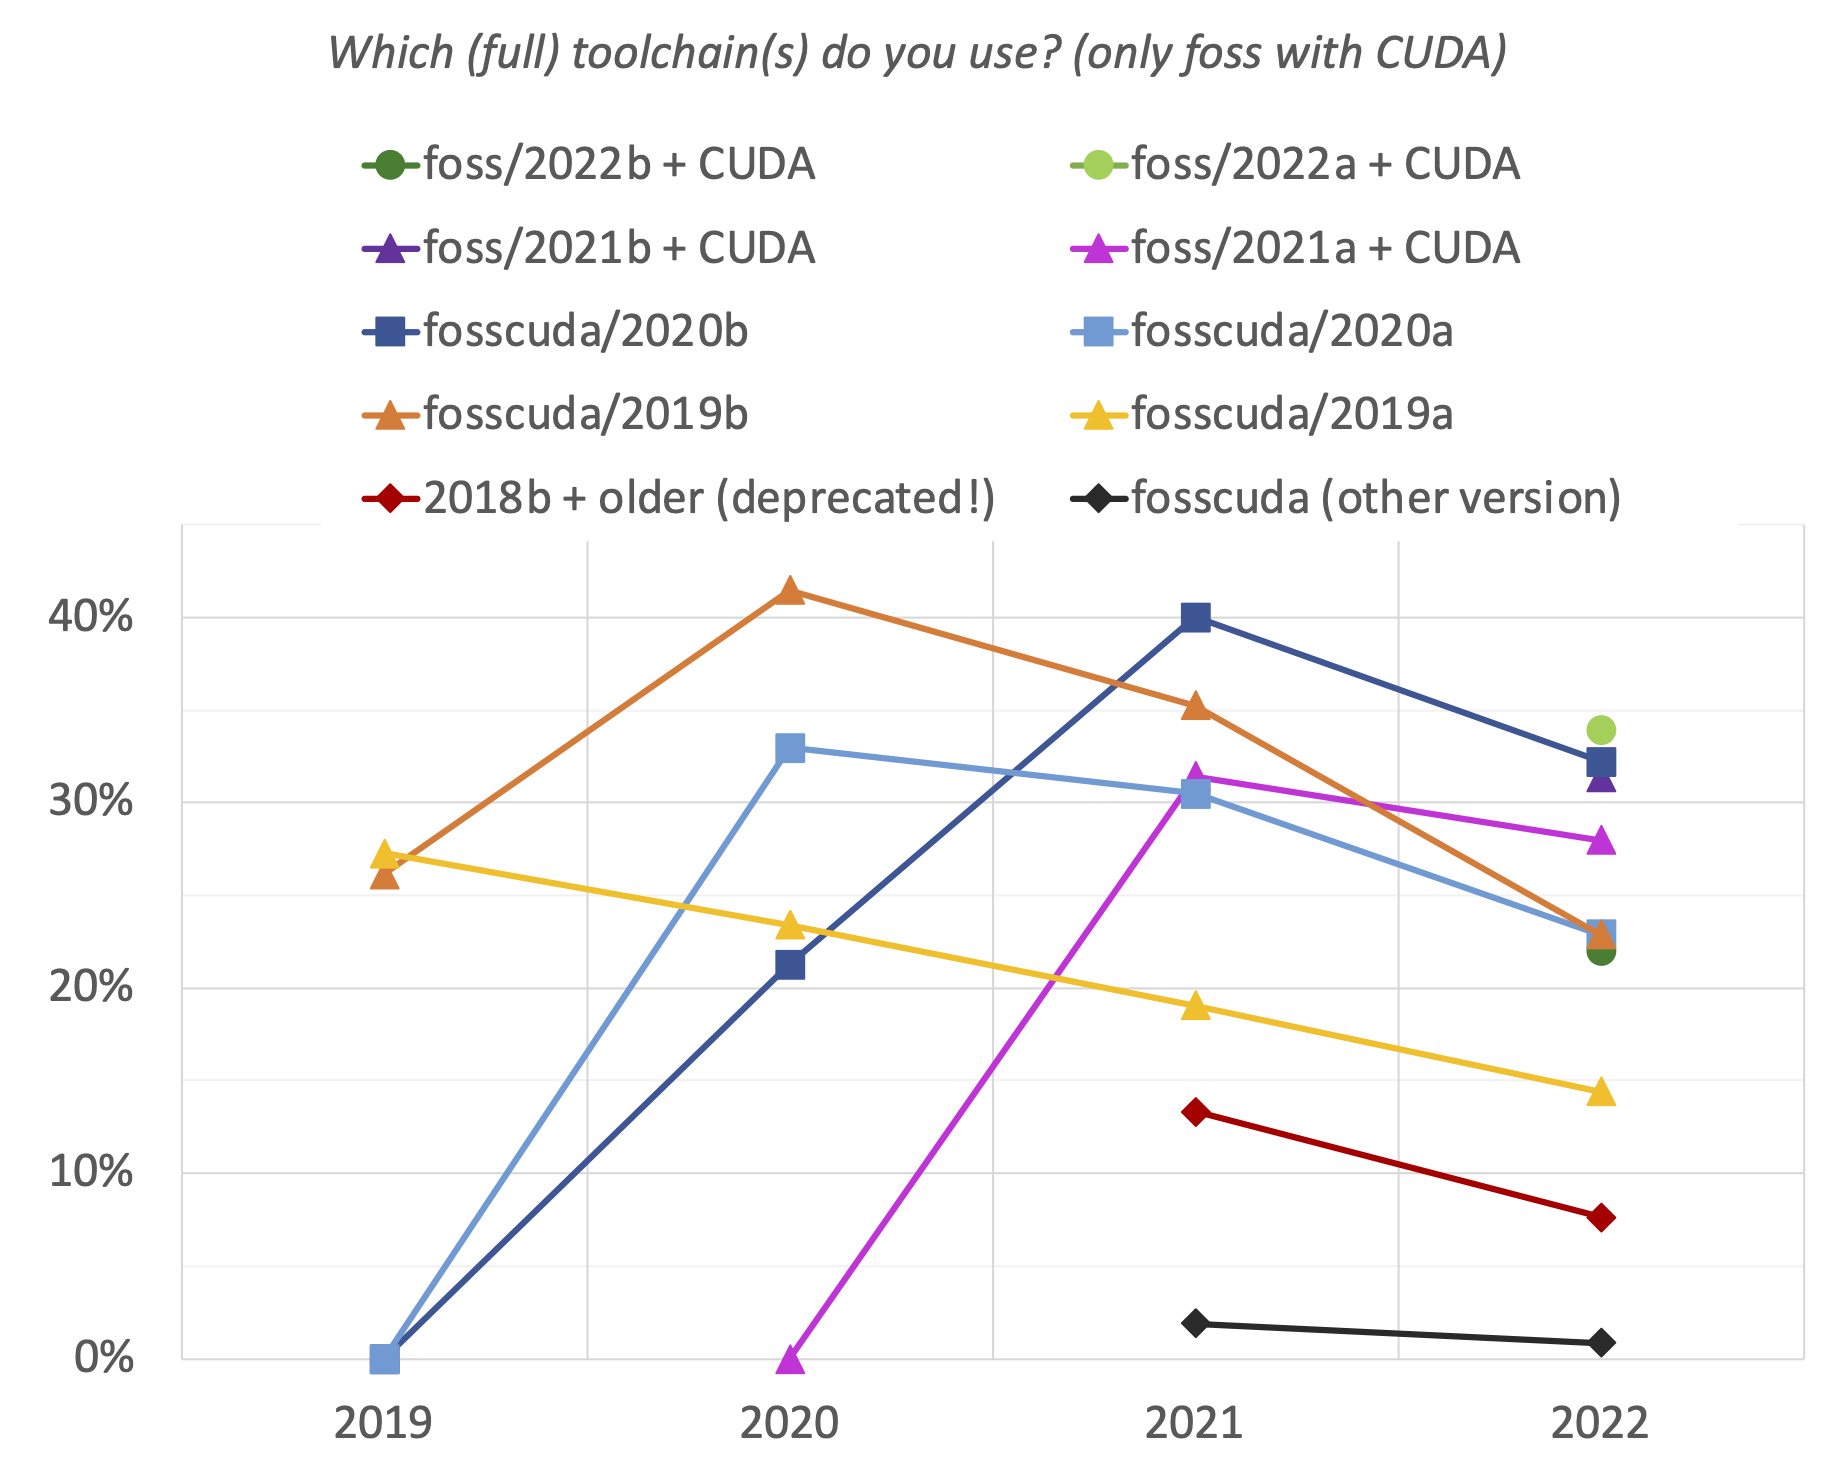 20. Which (full) toolchain(s) do you use? (only foss + CUDA)